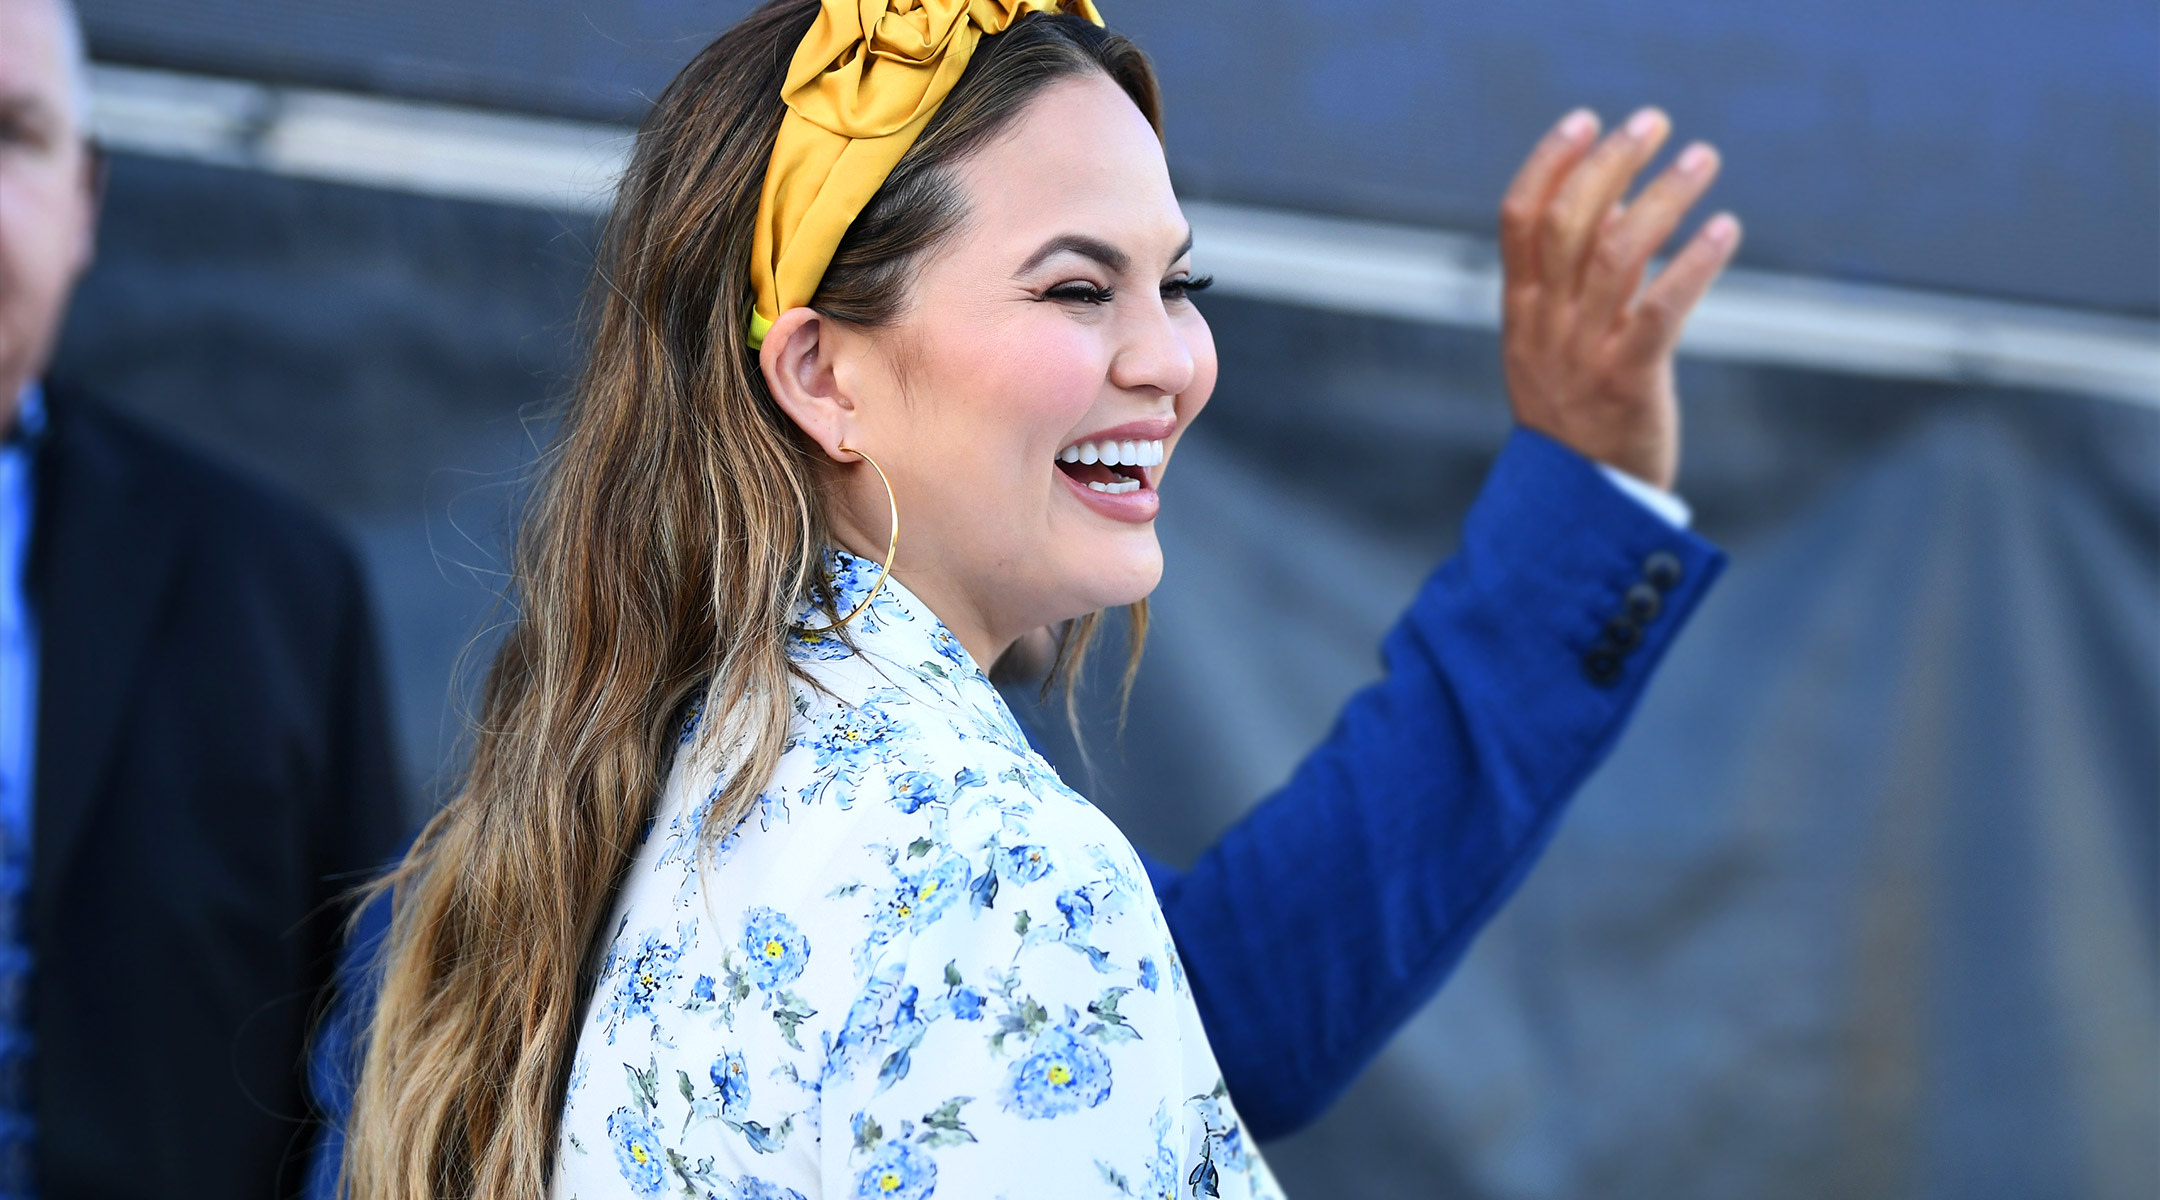 chrissy teigen laughing, posted about spilling her breast milk on twitter